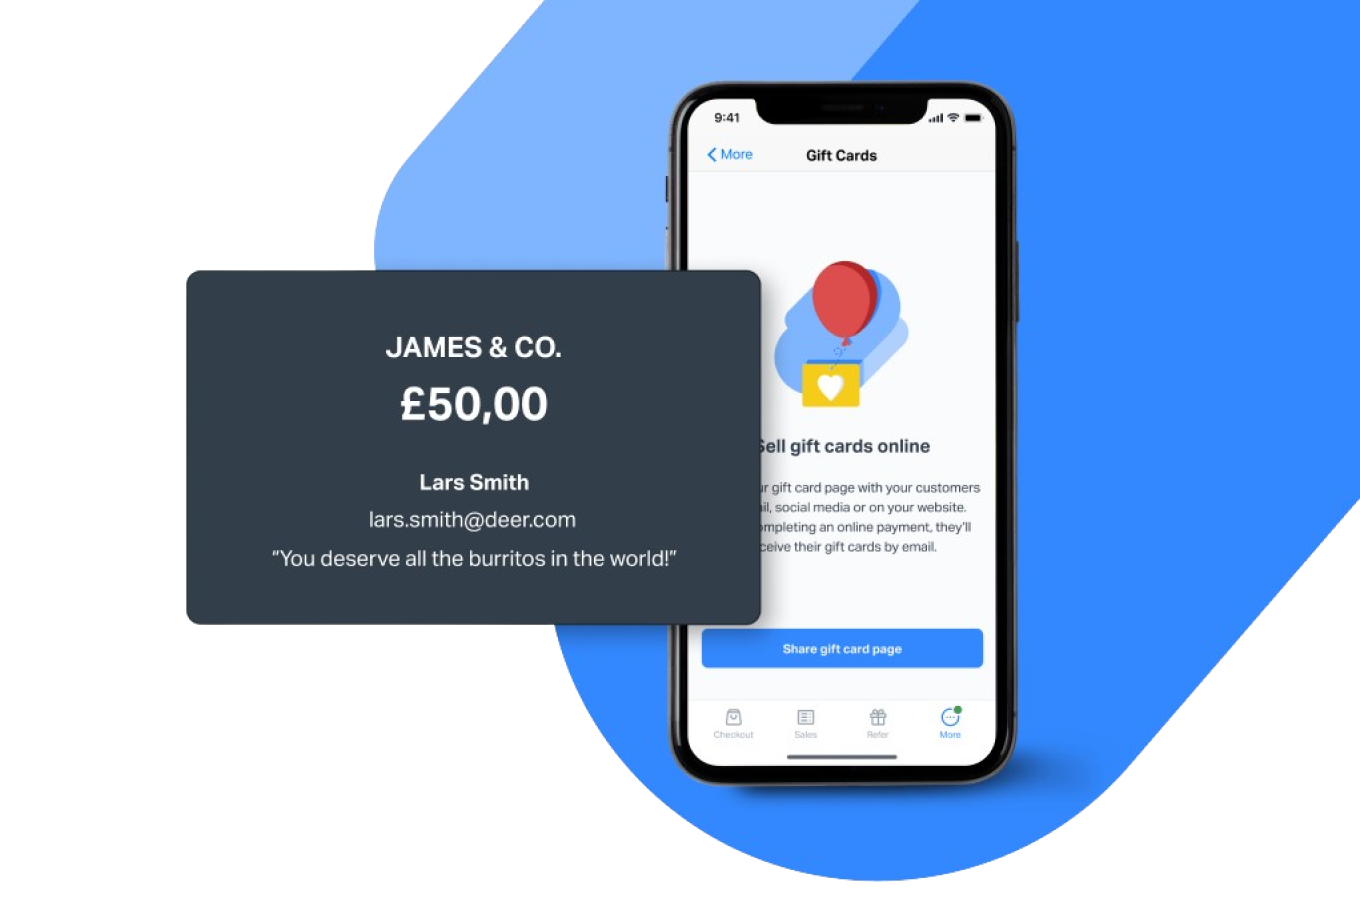 SumUp teams with Google to allow businesses to add gift cards to